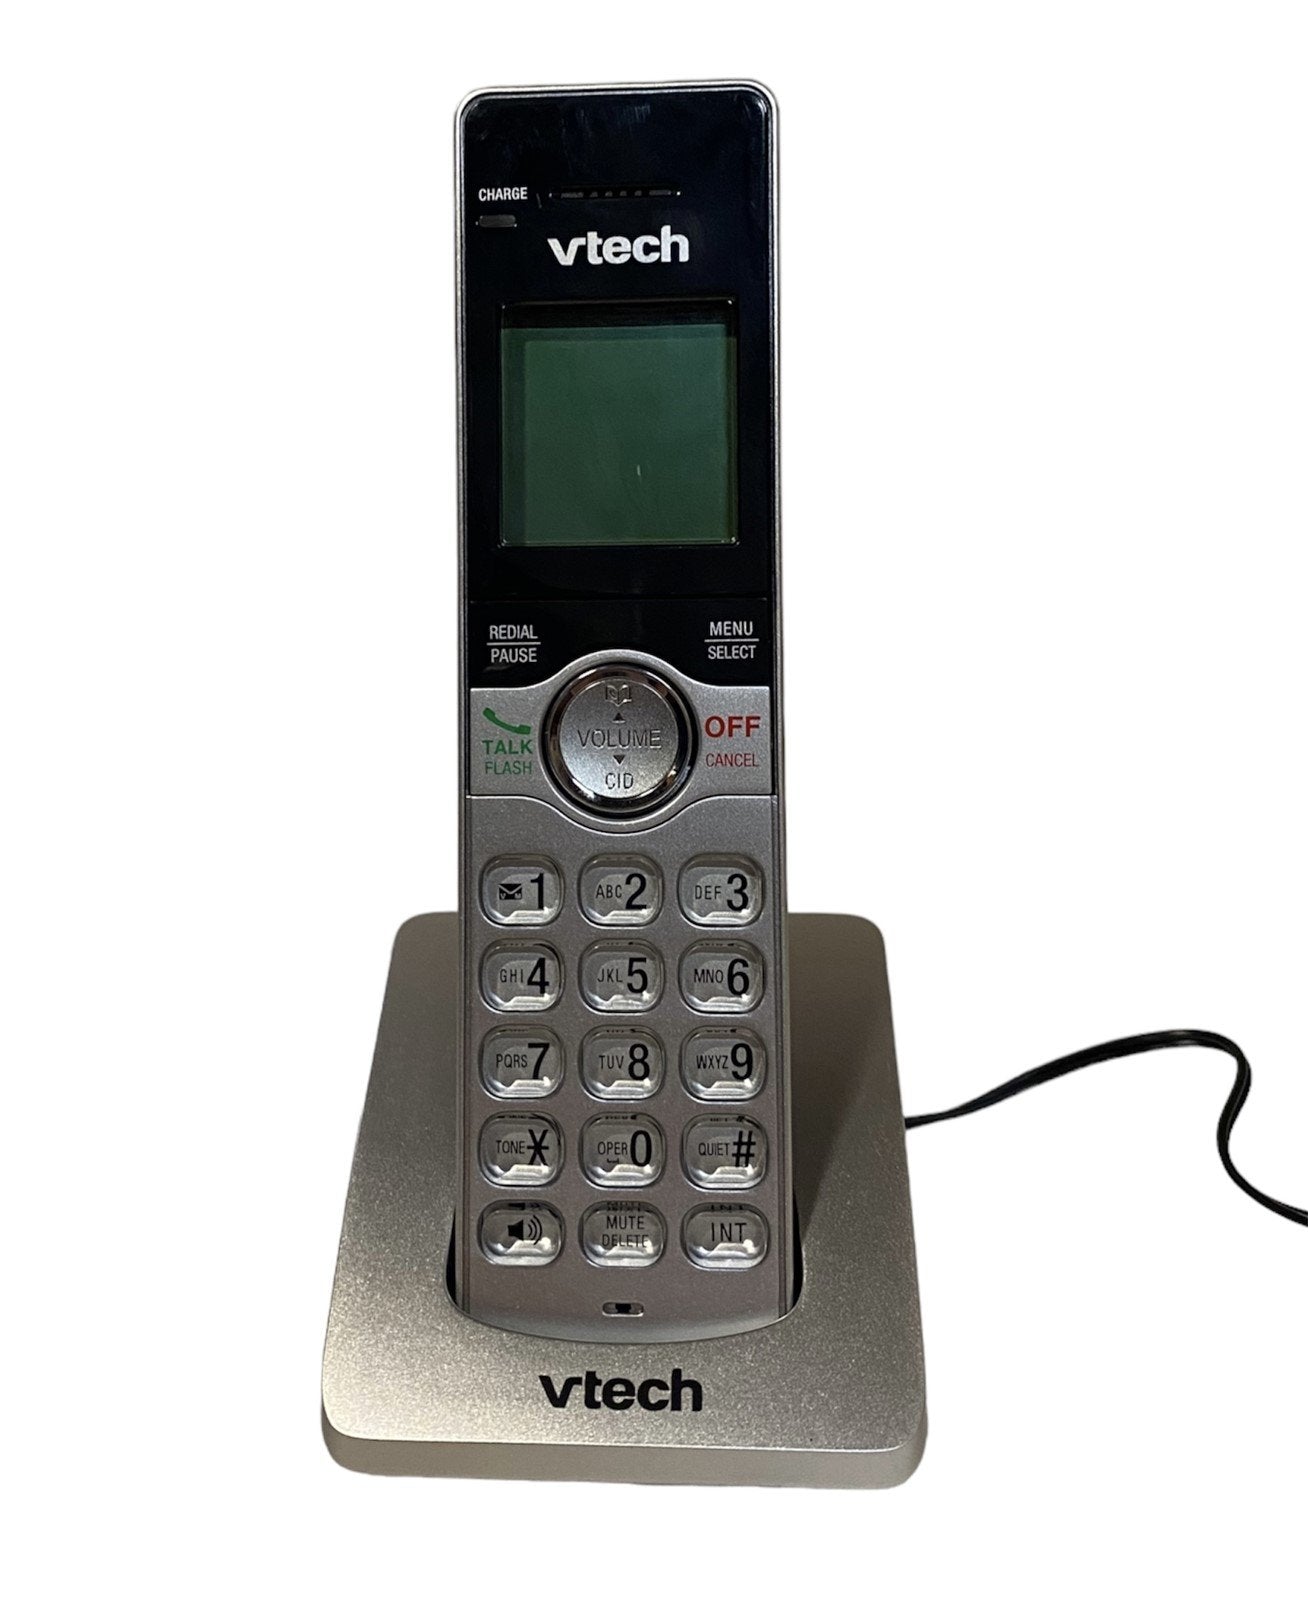 Vtech Cordless Phone, Accessory Handset only, with caller ID/call waiting